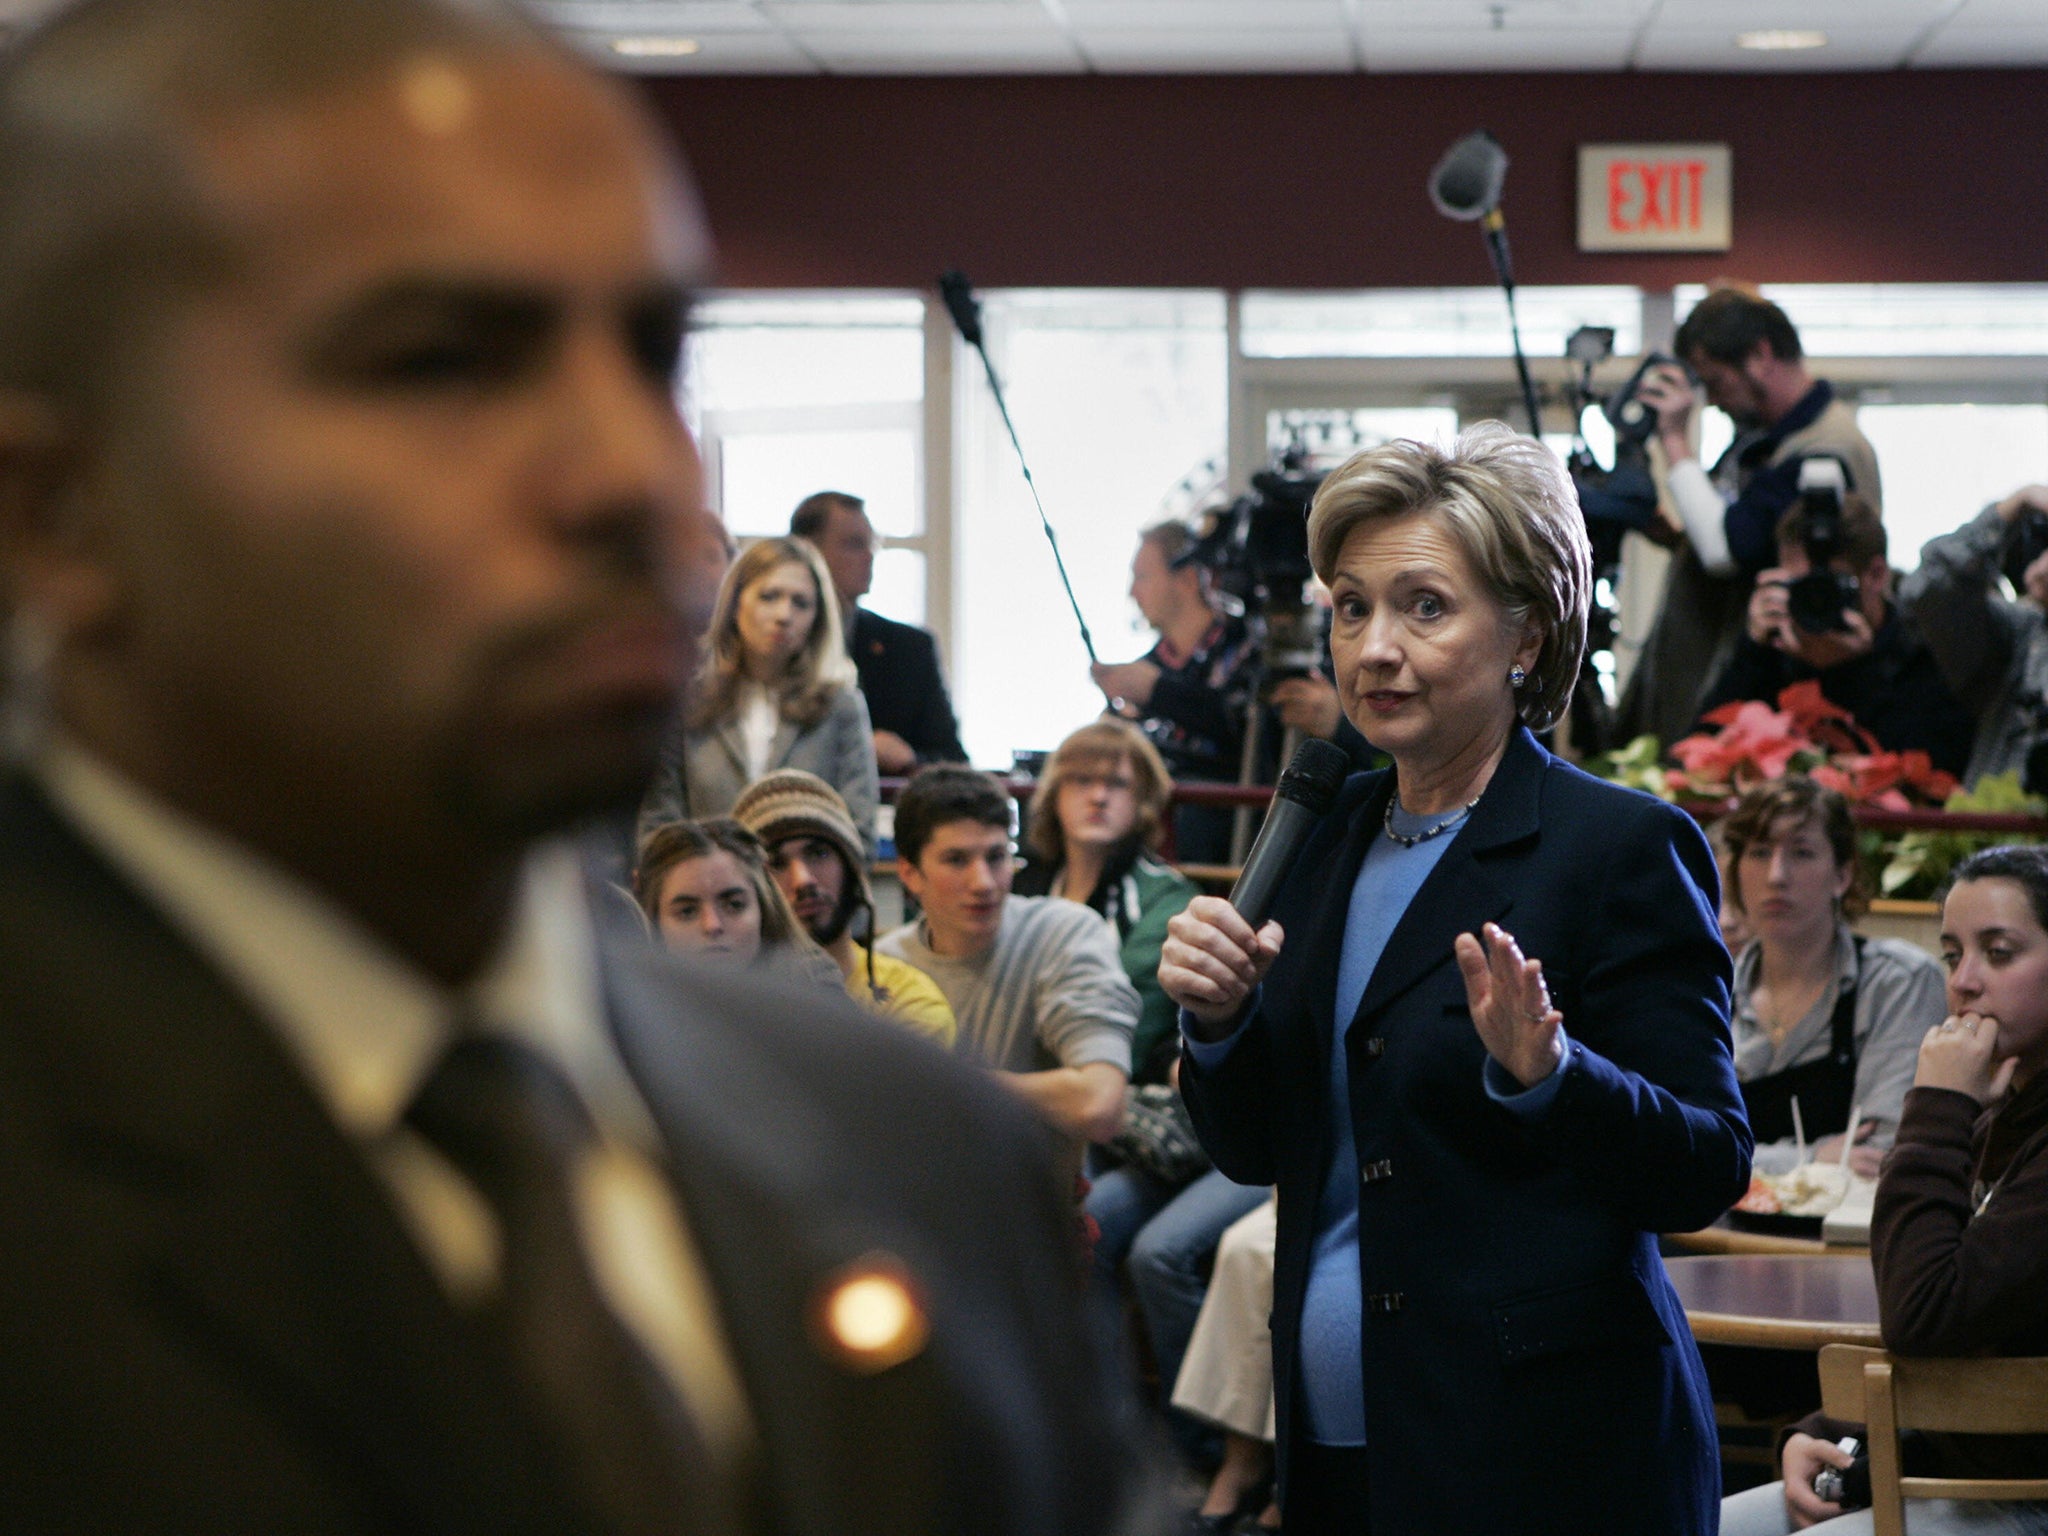 Hillary Clinton’s adversarial relationship with the press corps hurt her chances in the 2008 primary campaign